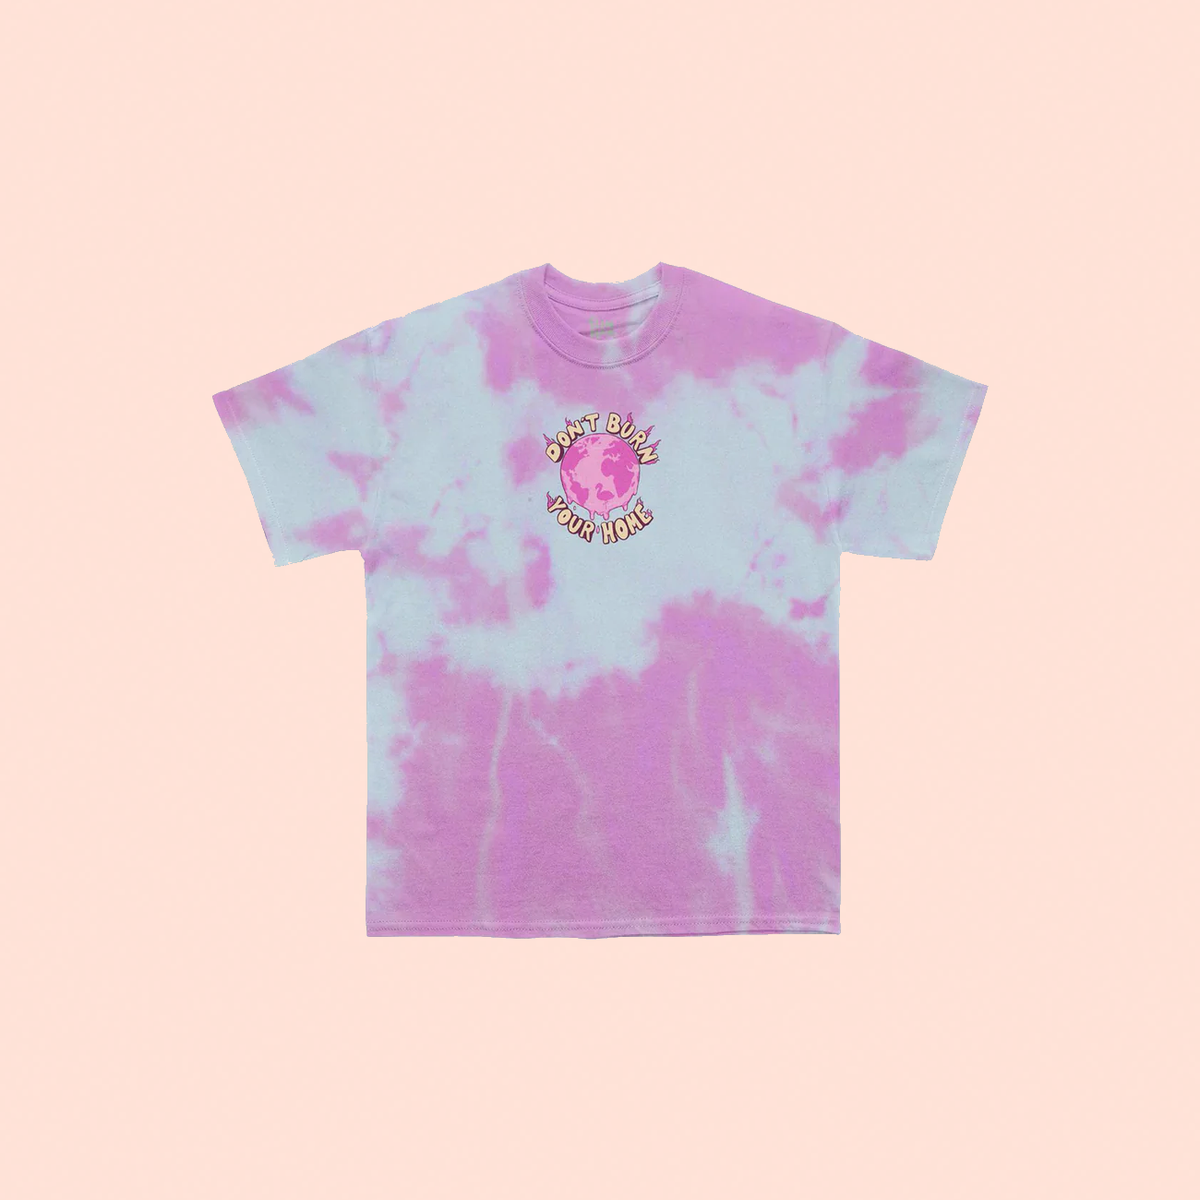 Don't Burn Your Home Youth Pink Tie Dye Tee